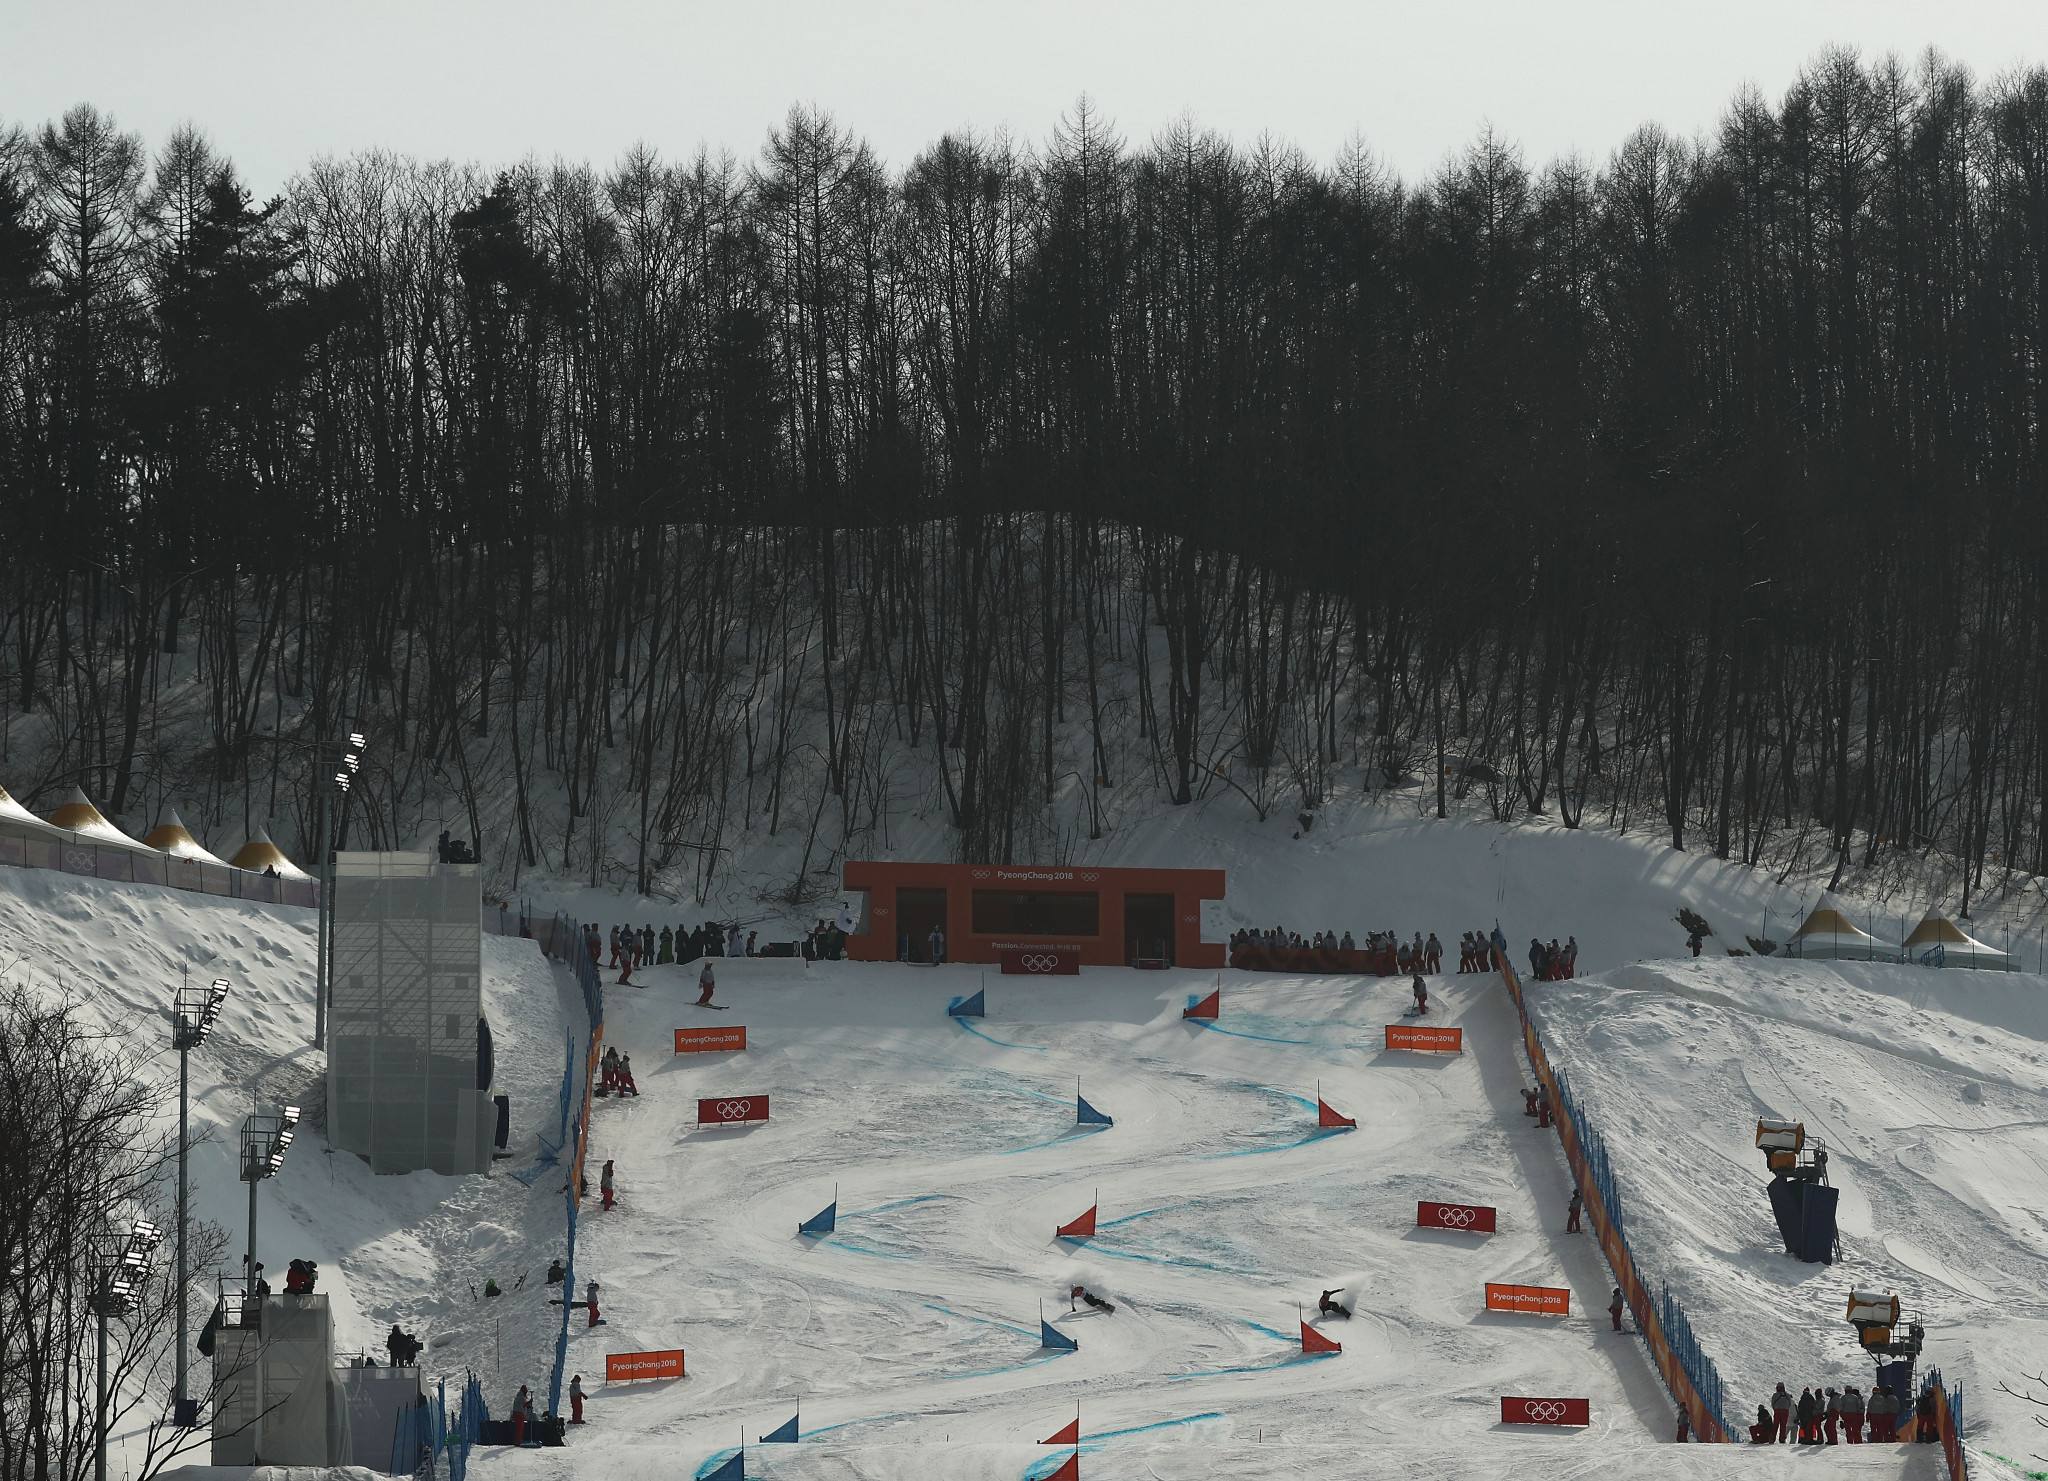 FIS Snowboard World Cup to make historic return to Pyeongchang 2018 venue for back-to-back parallel giant slalom races